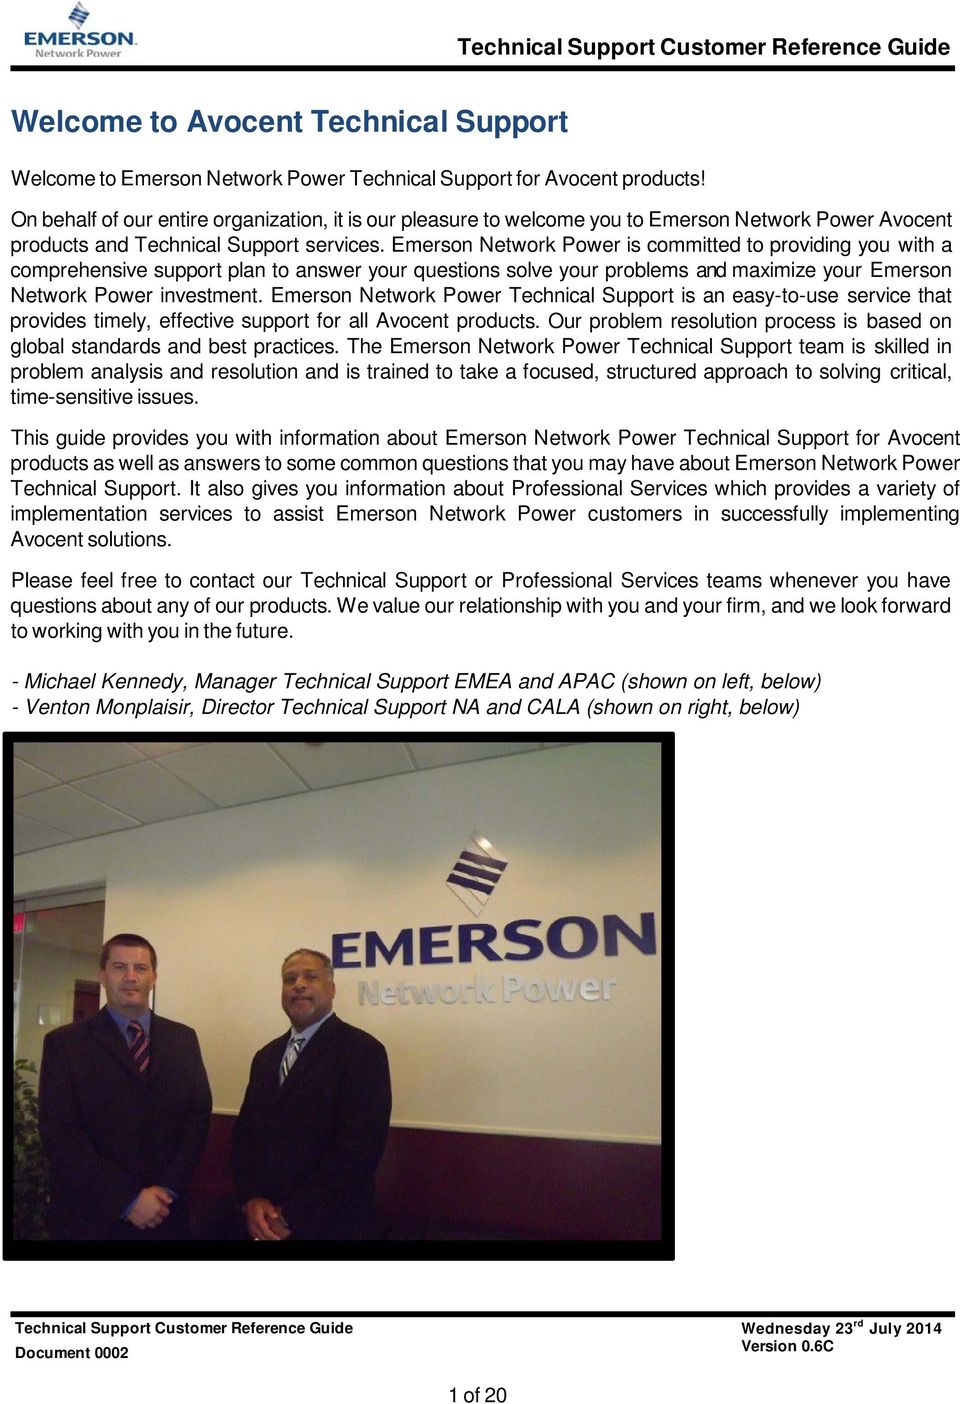 Emerson Network Power is committed to providing you with a comprehensive support plan to answer your questions solve your problems and maximize your Emerson Network Power investment.